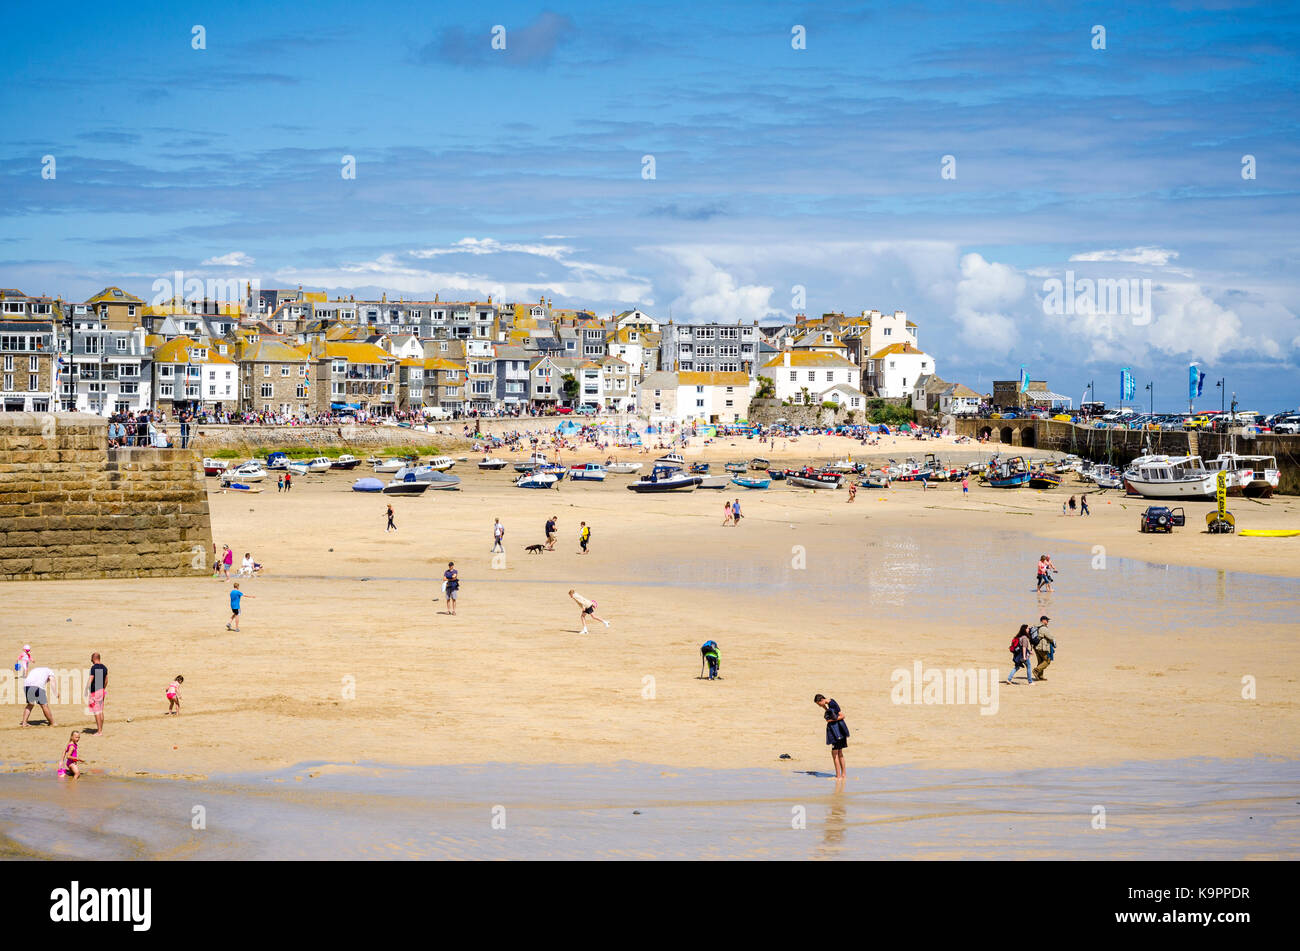 People on sandy beach in St Ives harbour at low tide. English coastal seaside town St Ives, Cornwall, England UK Stock Photo